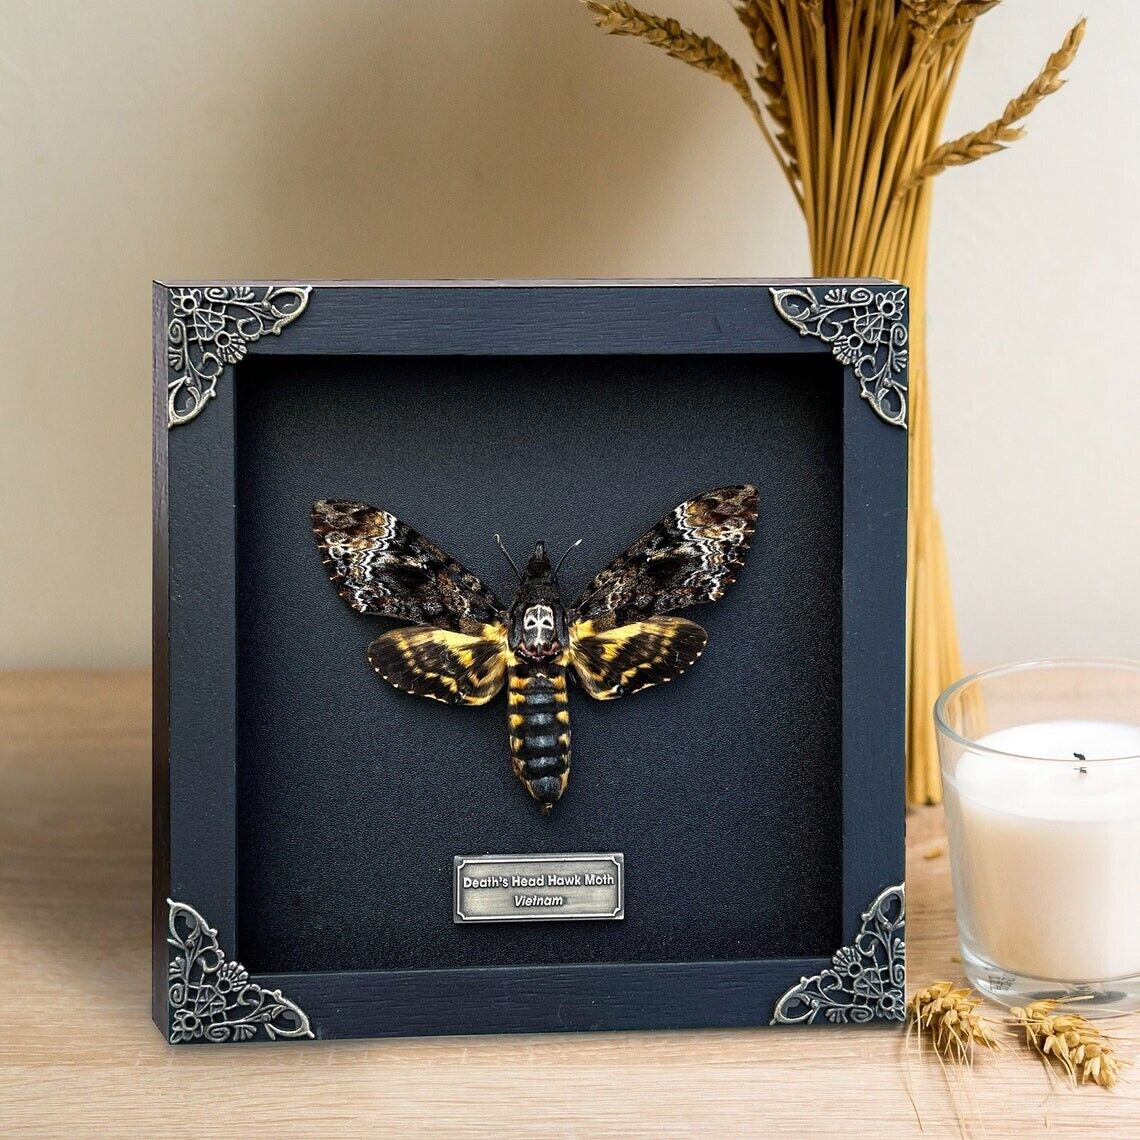 Real Framed Death Head Moth Acherontia Frame Dried Butterfly Insect Wall Decor